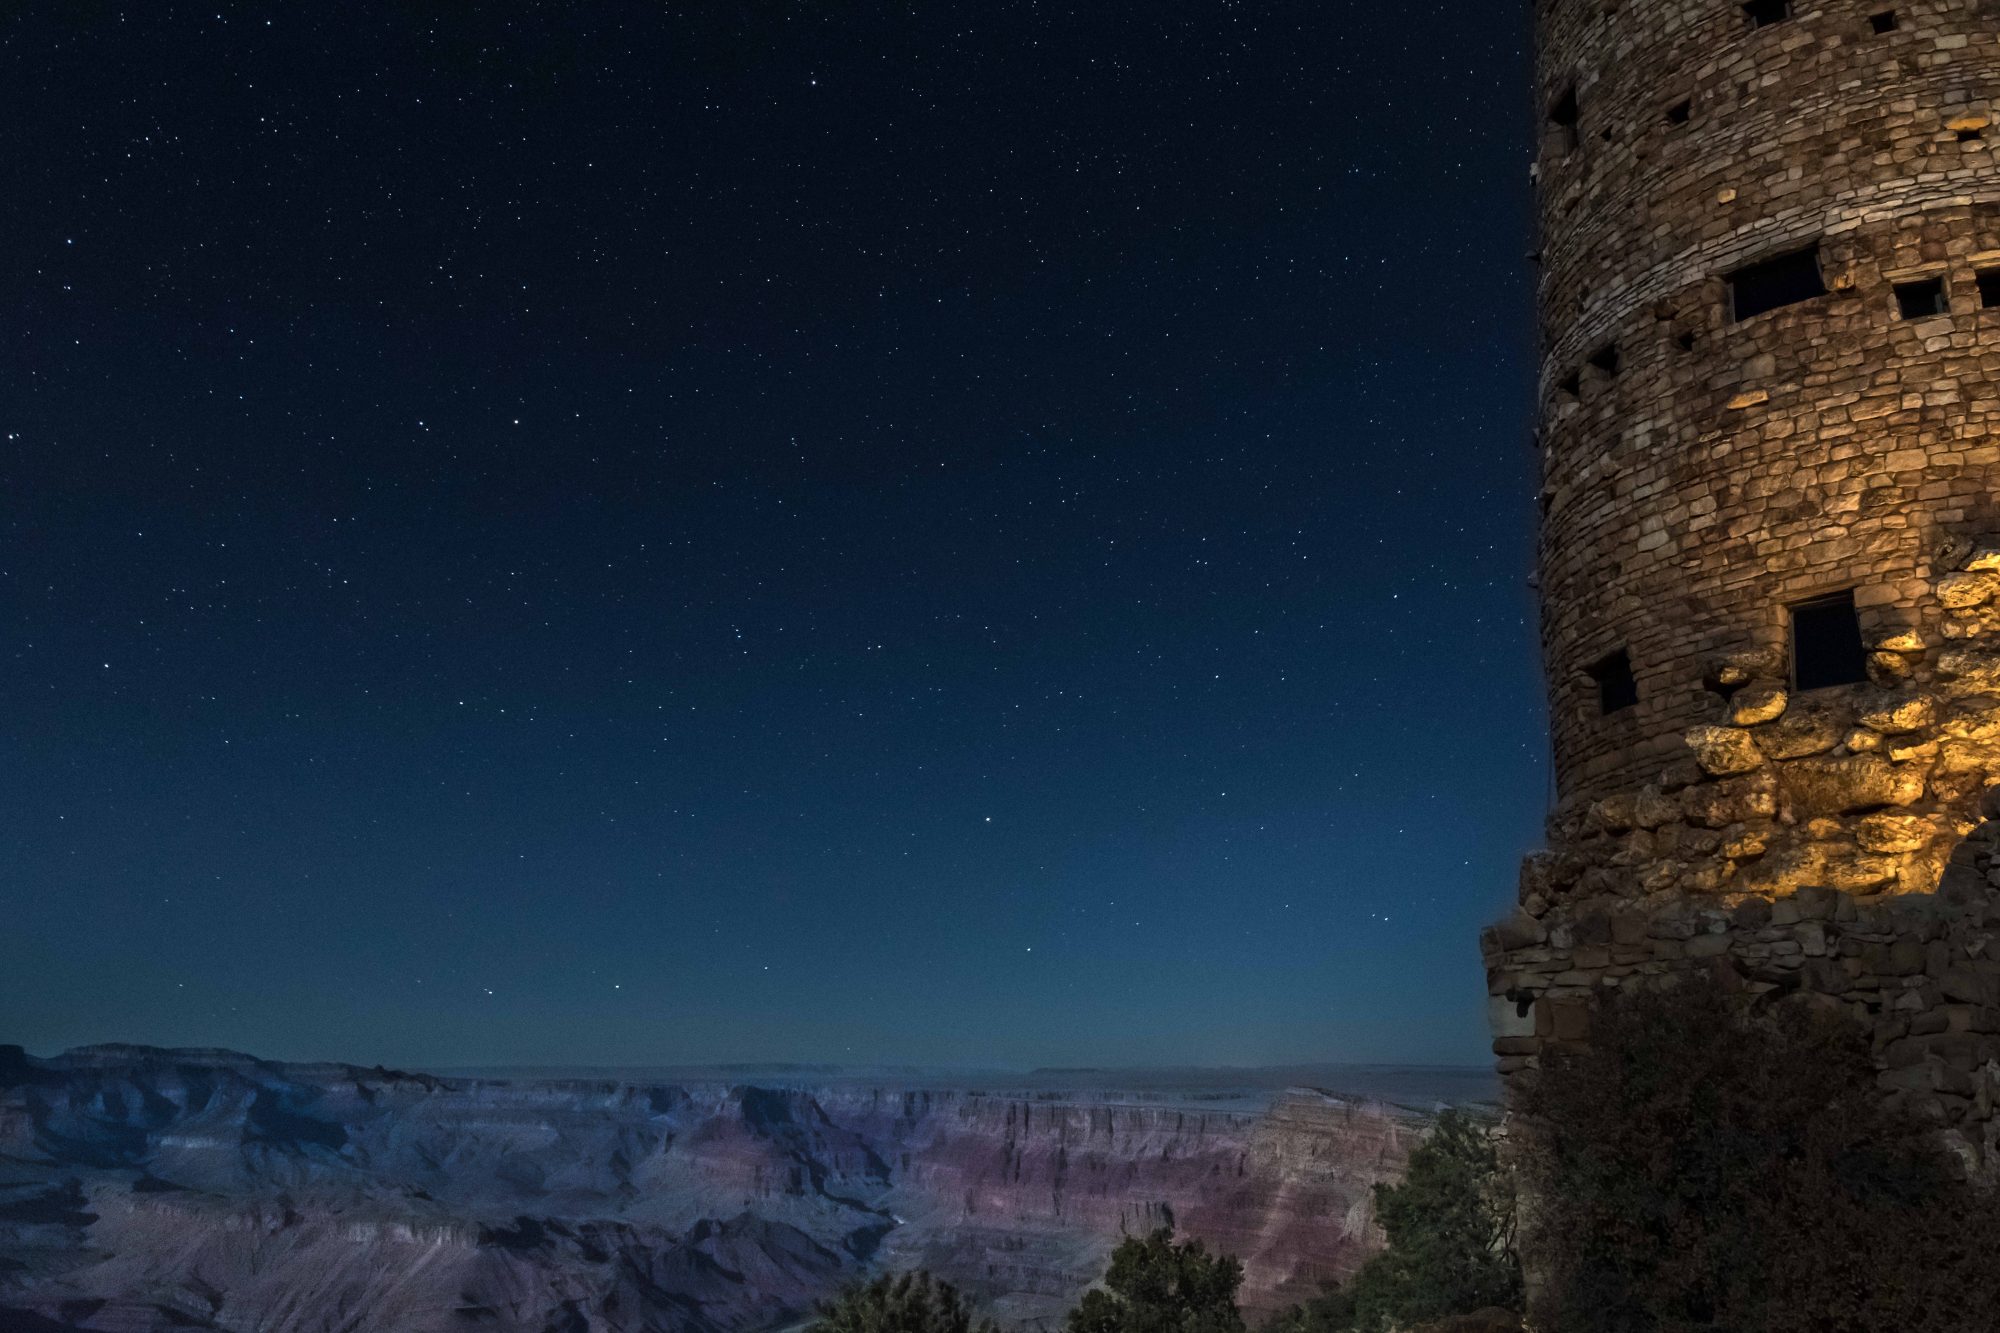 Night photograph of the Grand Canyon, the Watch Tower, and the starlit sky.